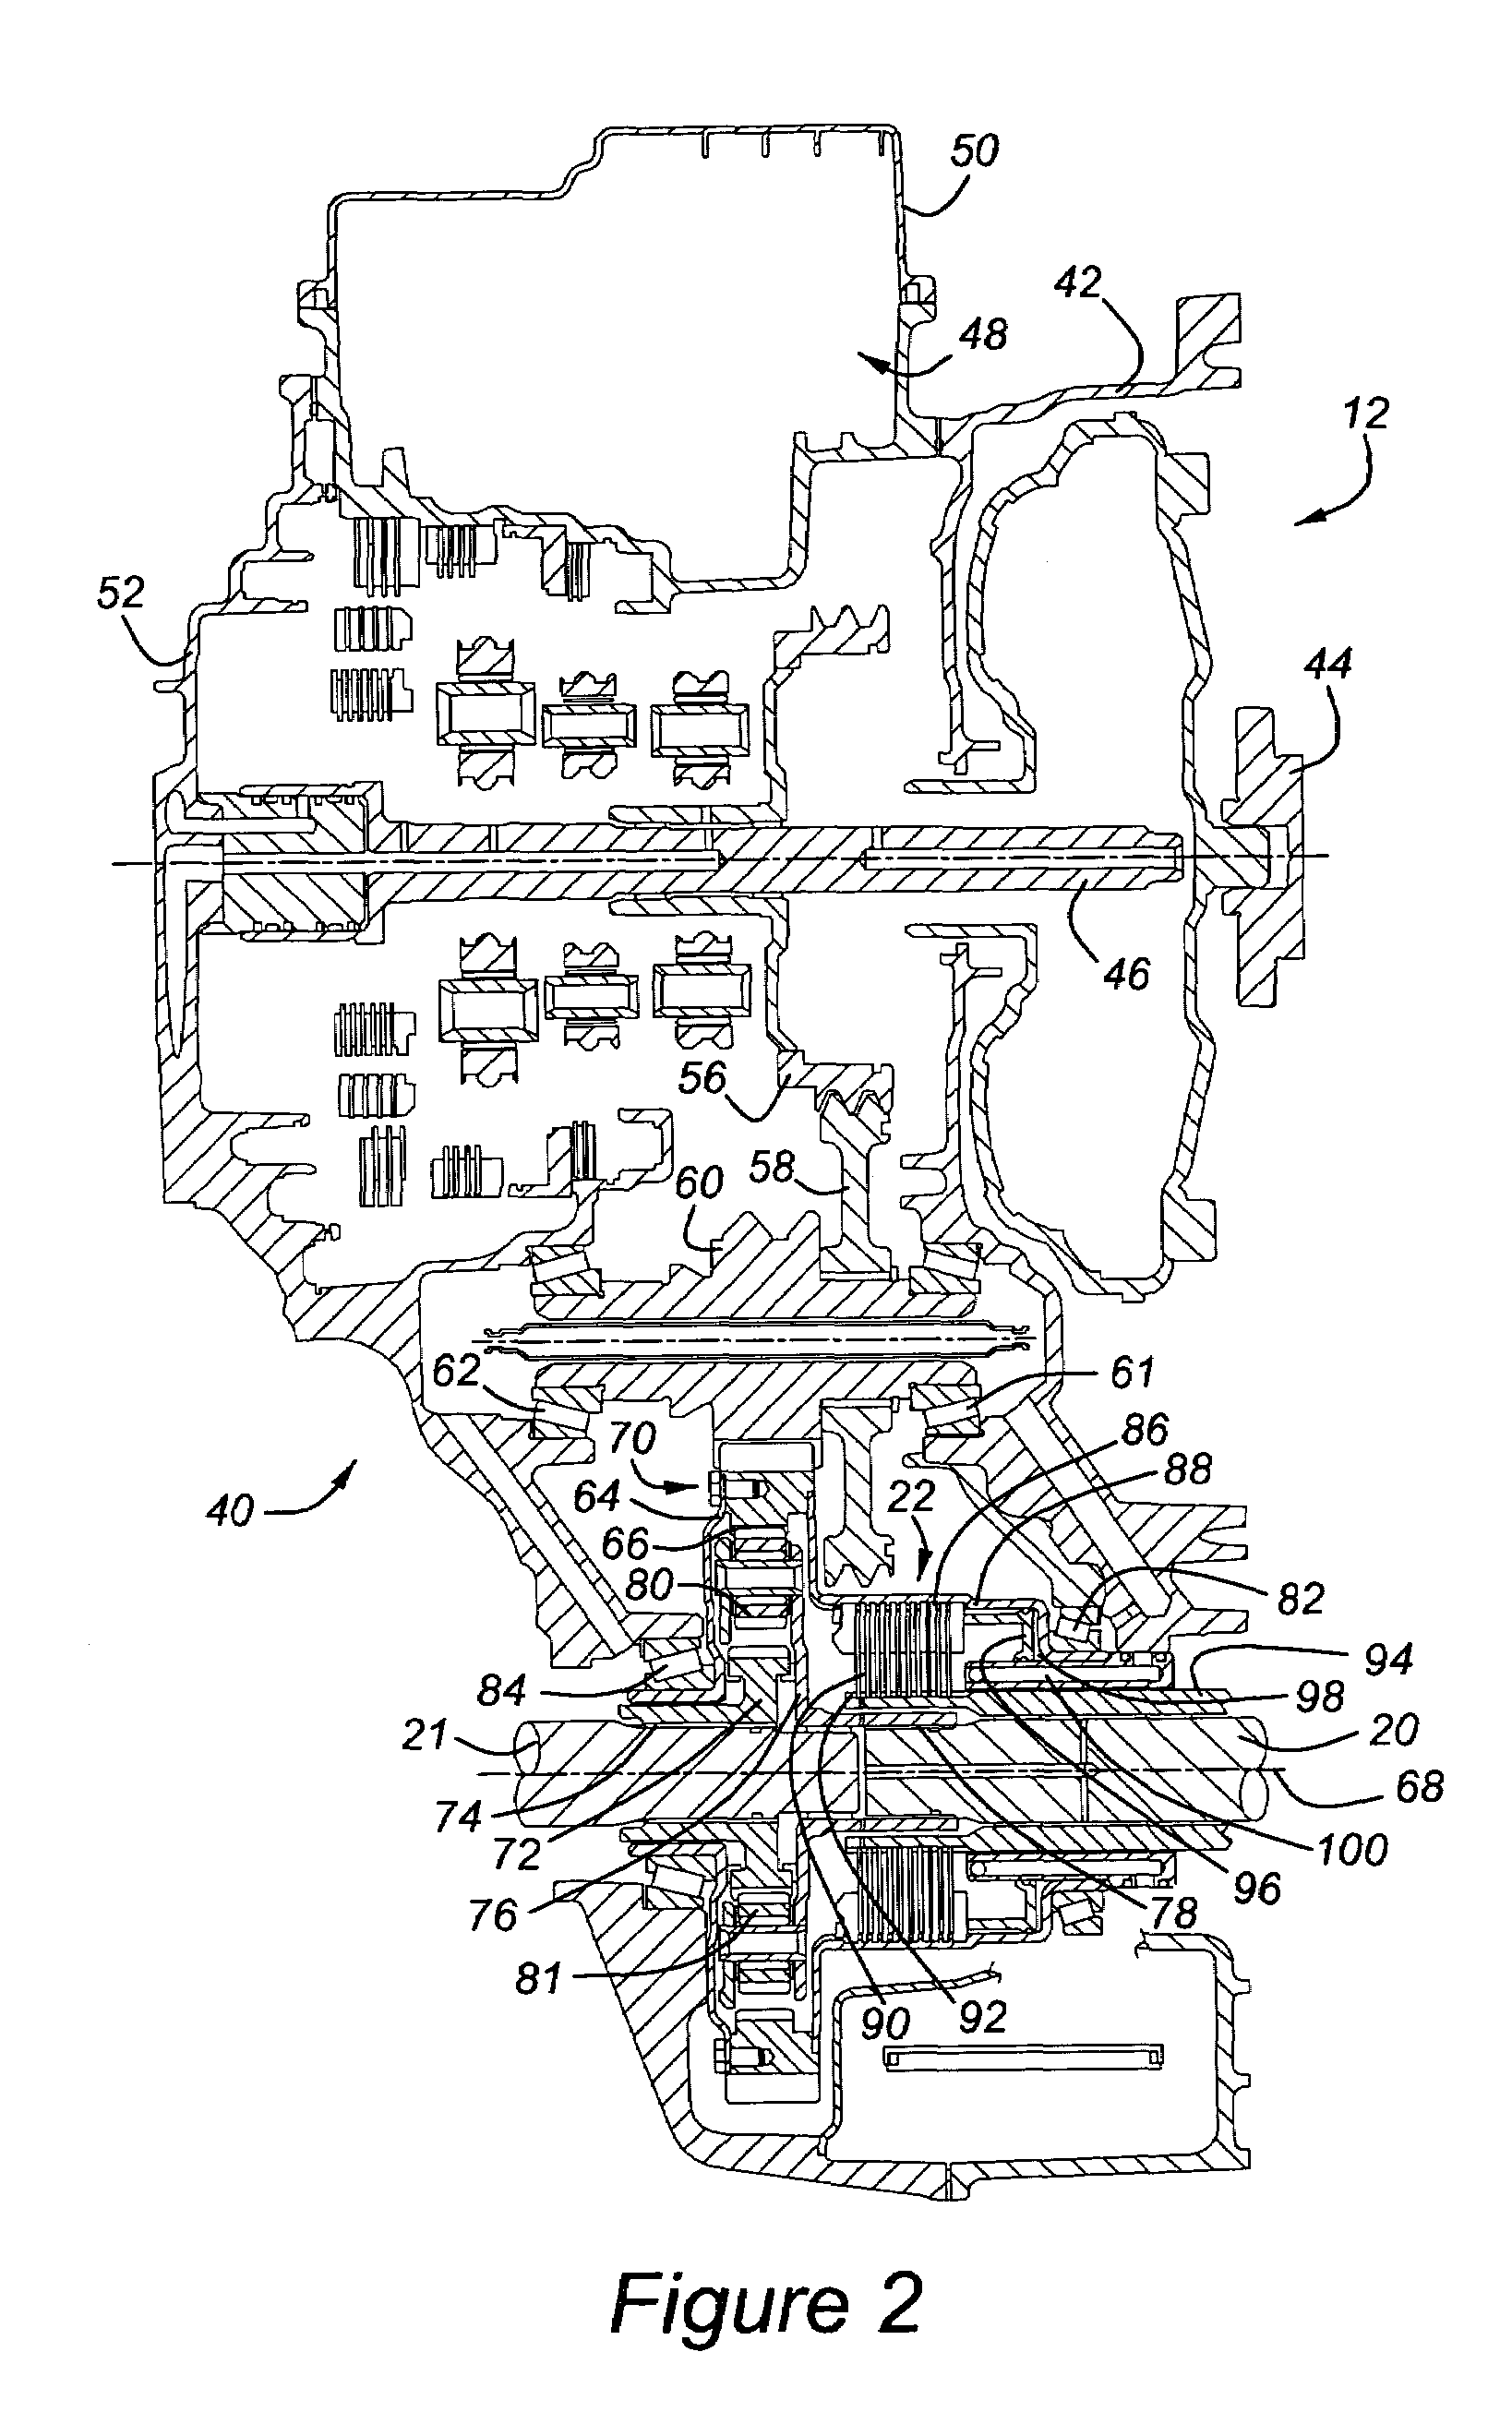 Transaxle having a differential mechanism and on-demand transfer clutch